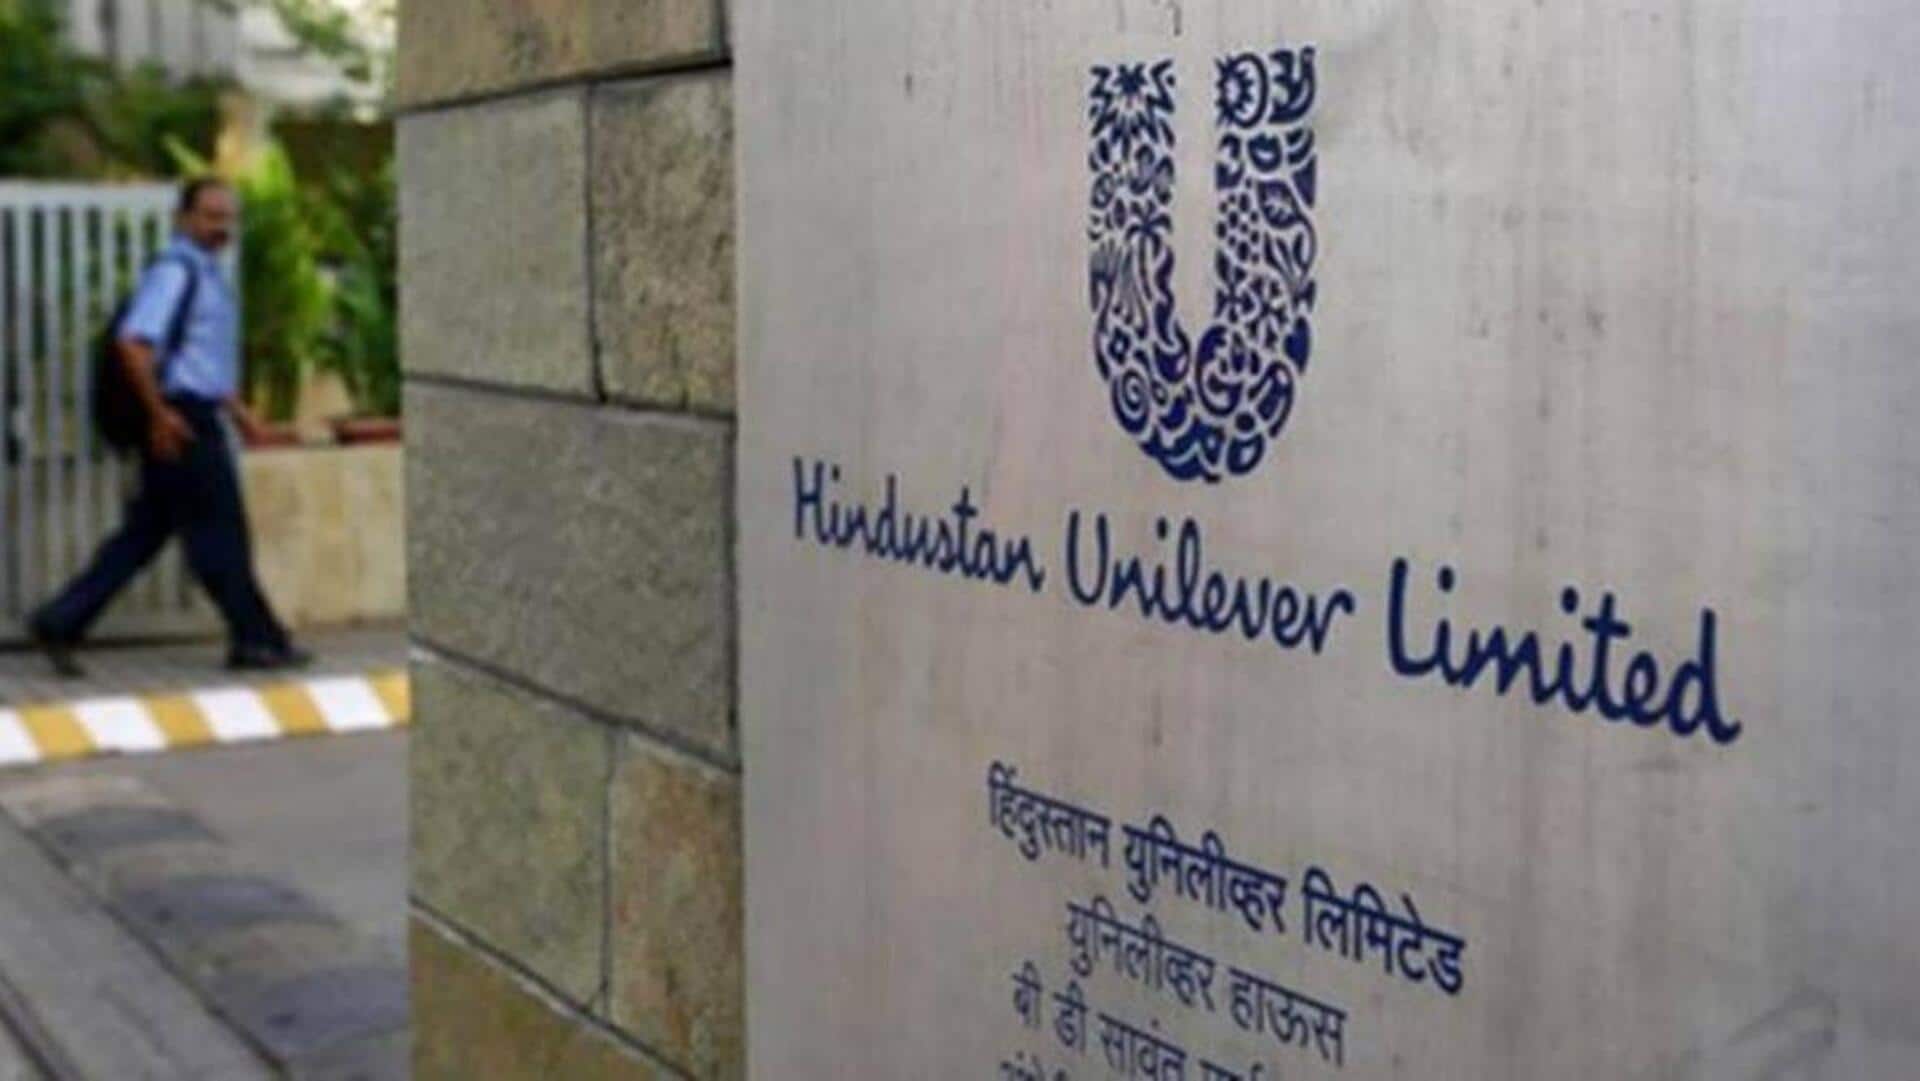 Why distributors are boycotting Hindustan Unilever products